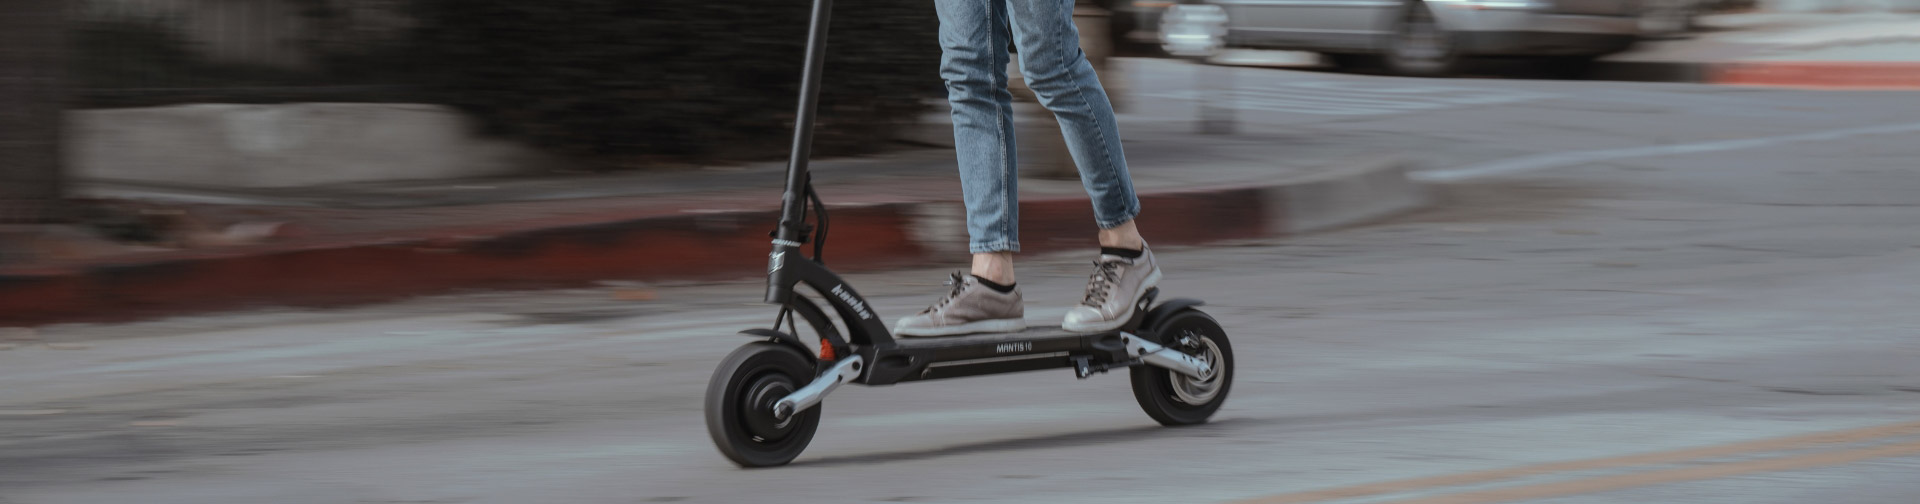 Kaabo electric scooter